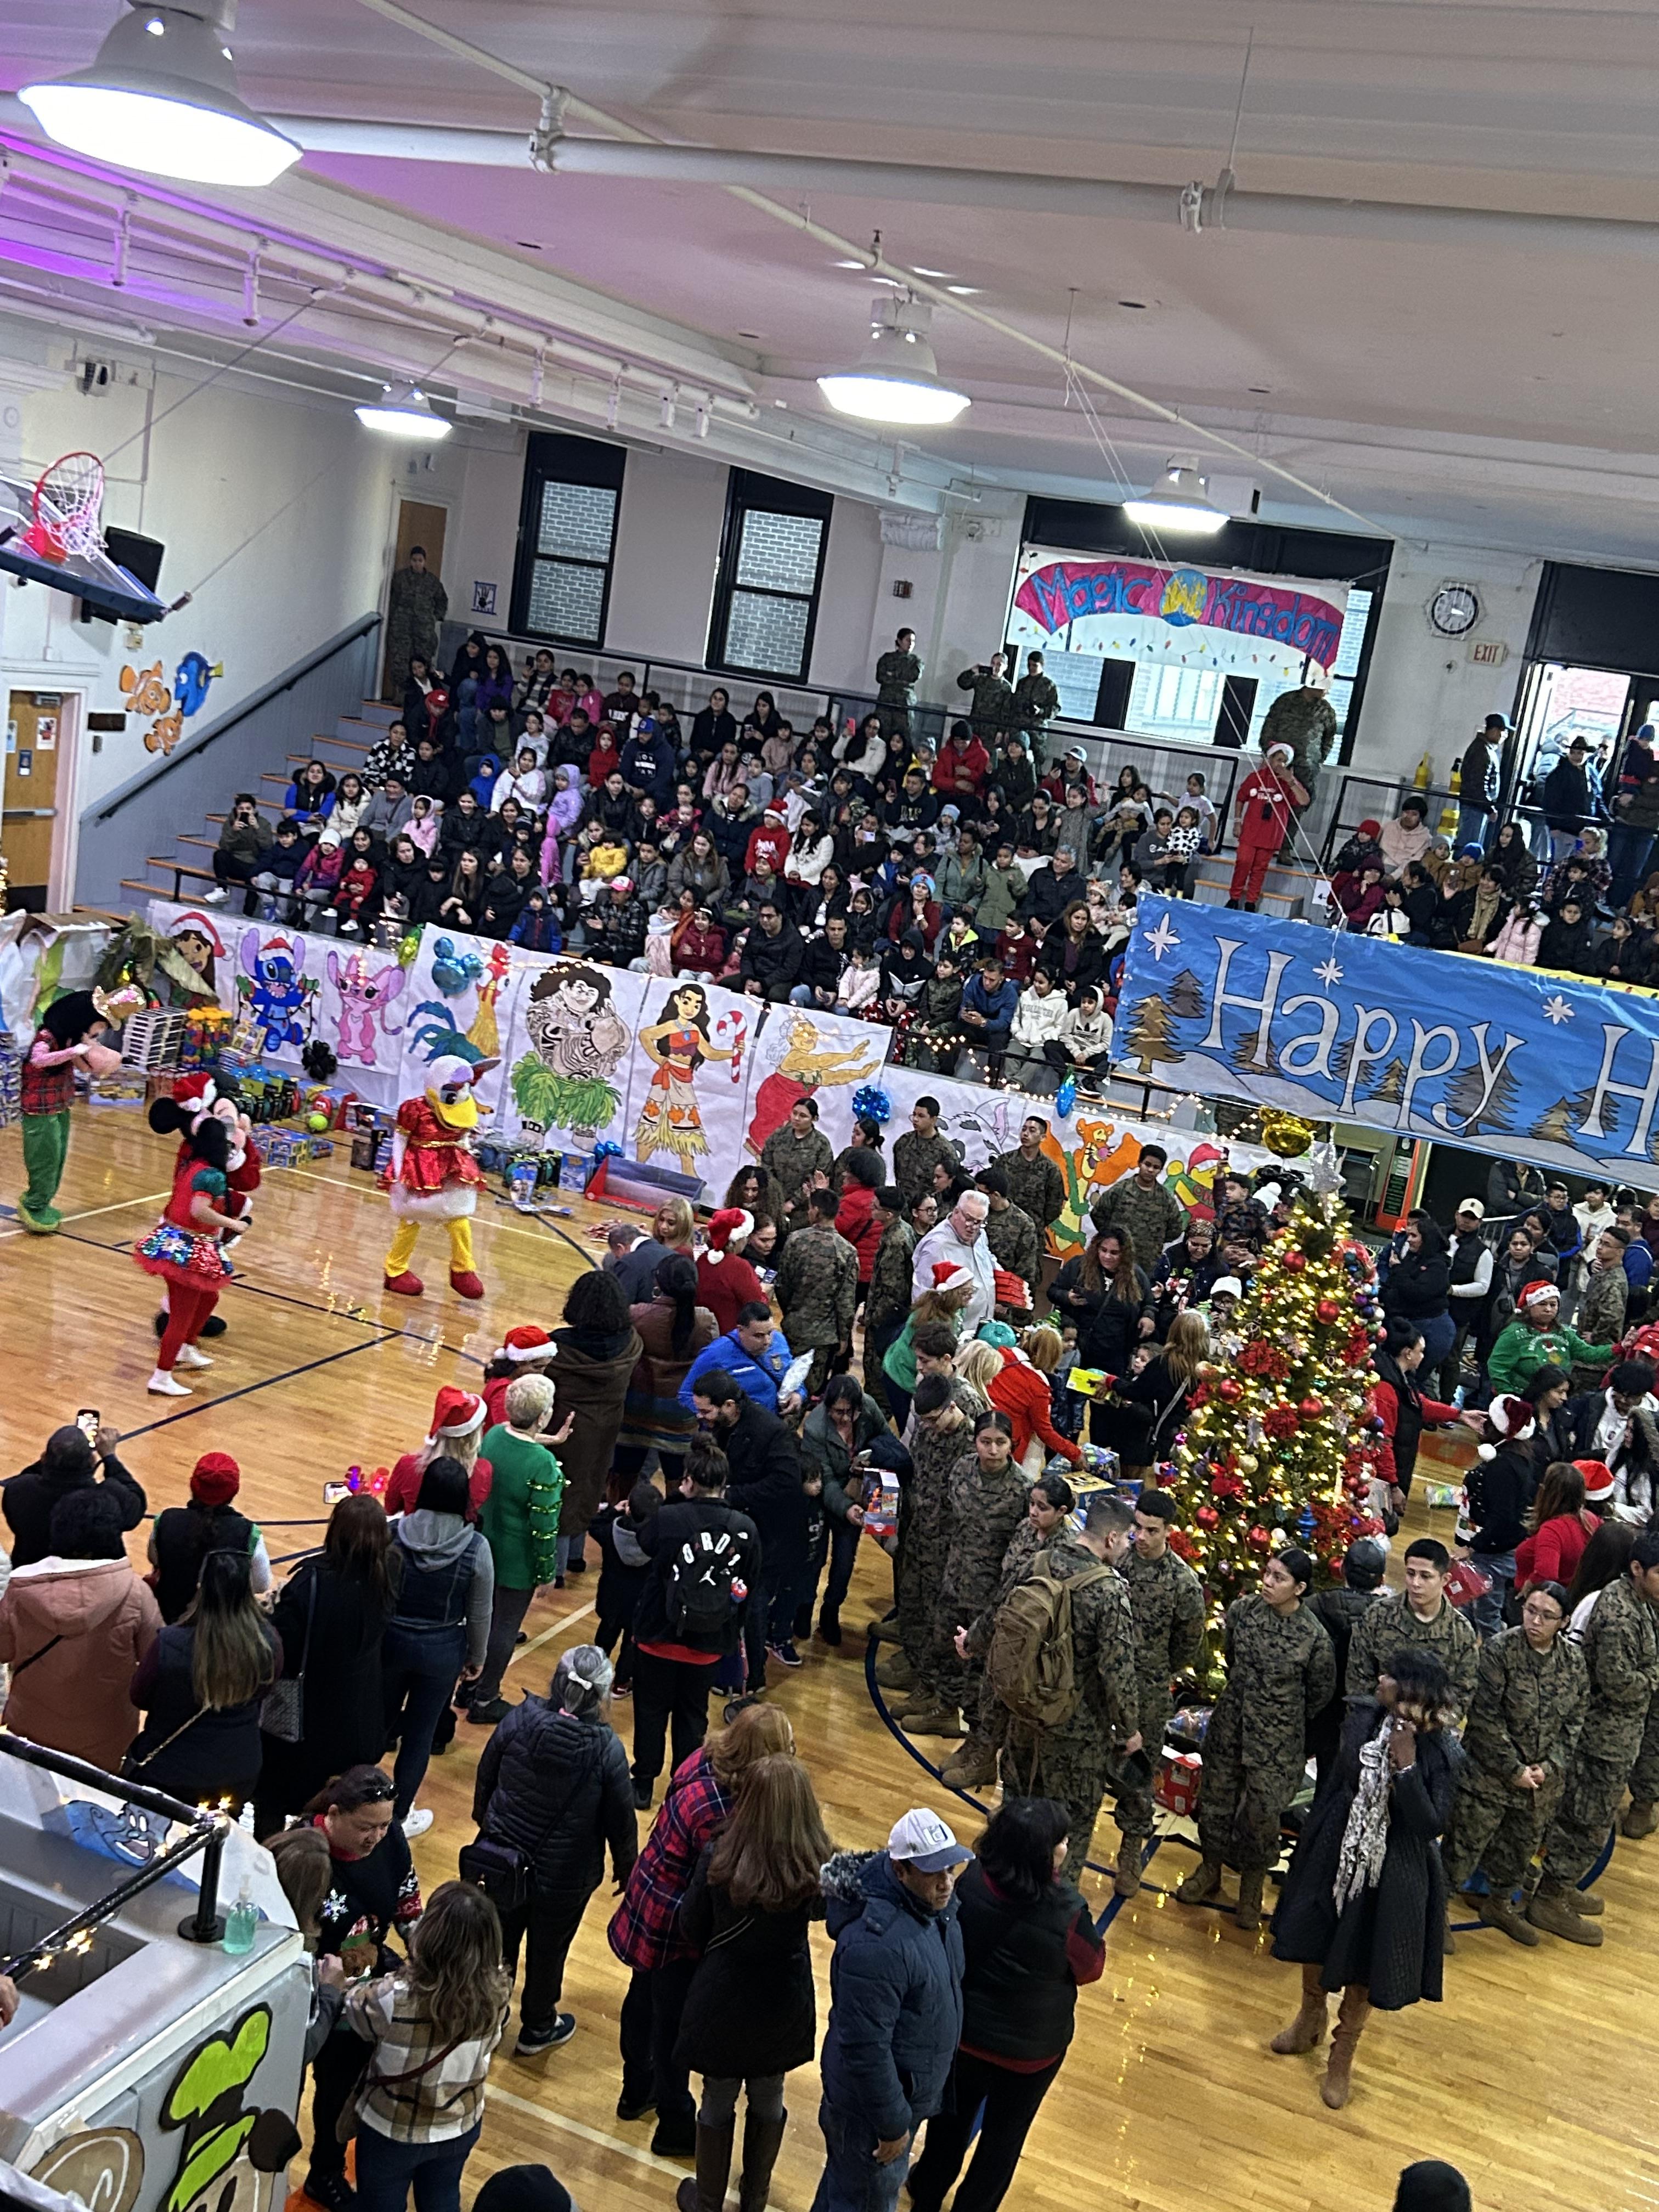 Mayor Brian Stack Toy Giveaway at the Washington School